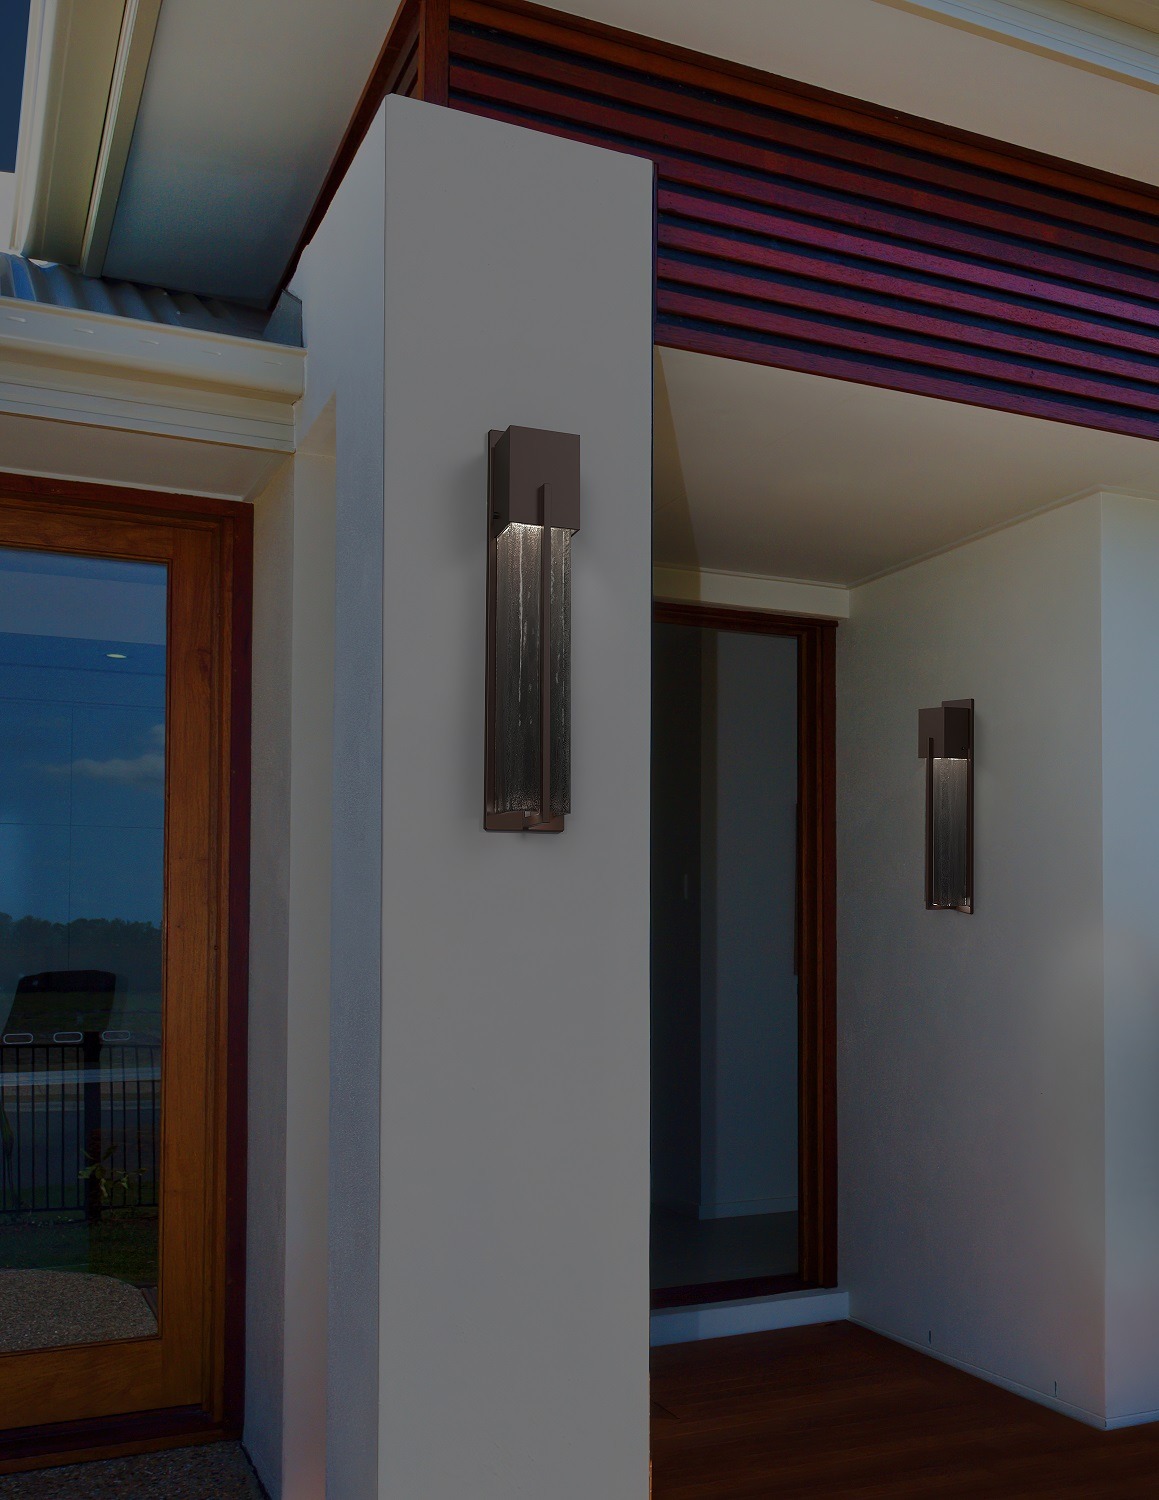 Hammerton Studio Square outdoor wall sconces enhance the pillars of a home exterior